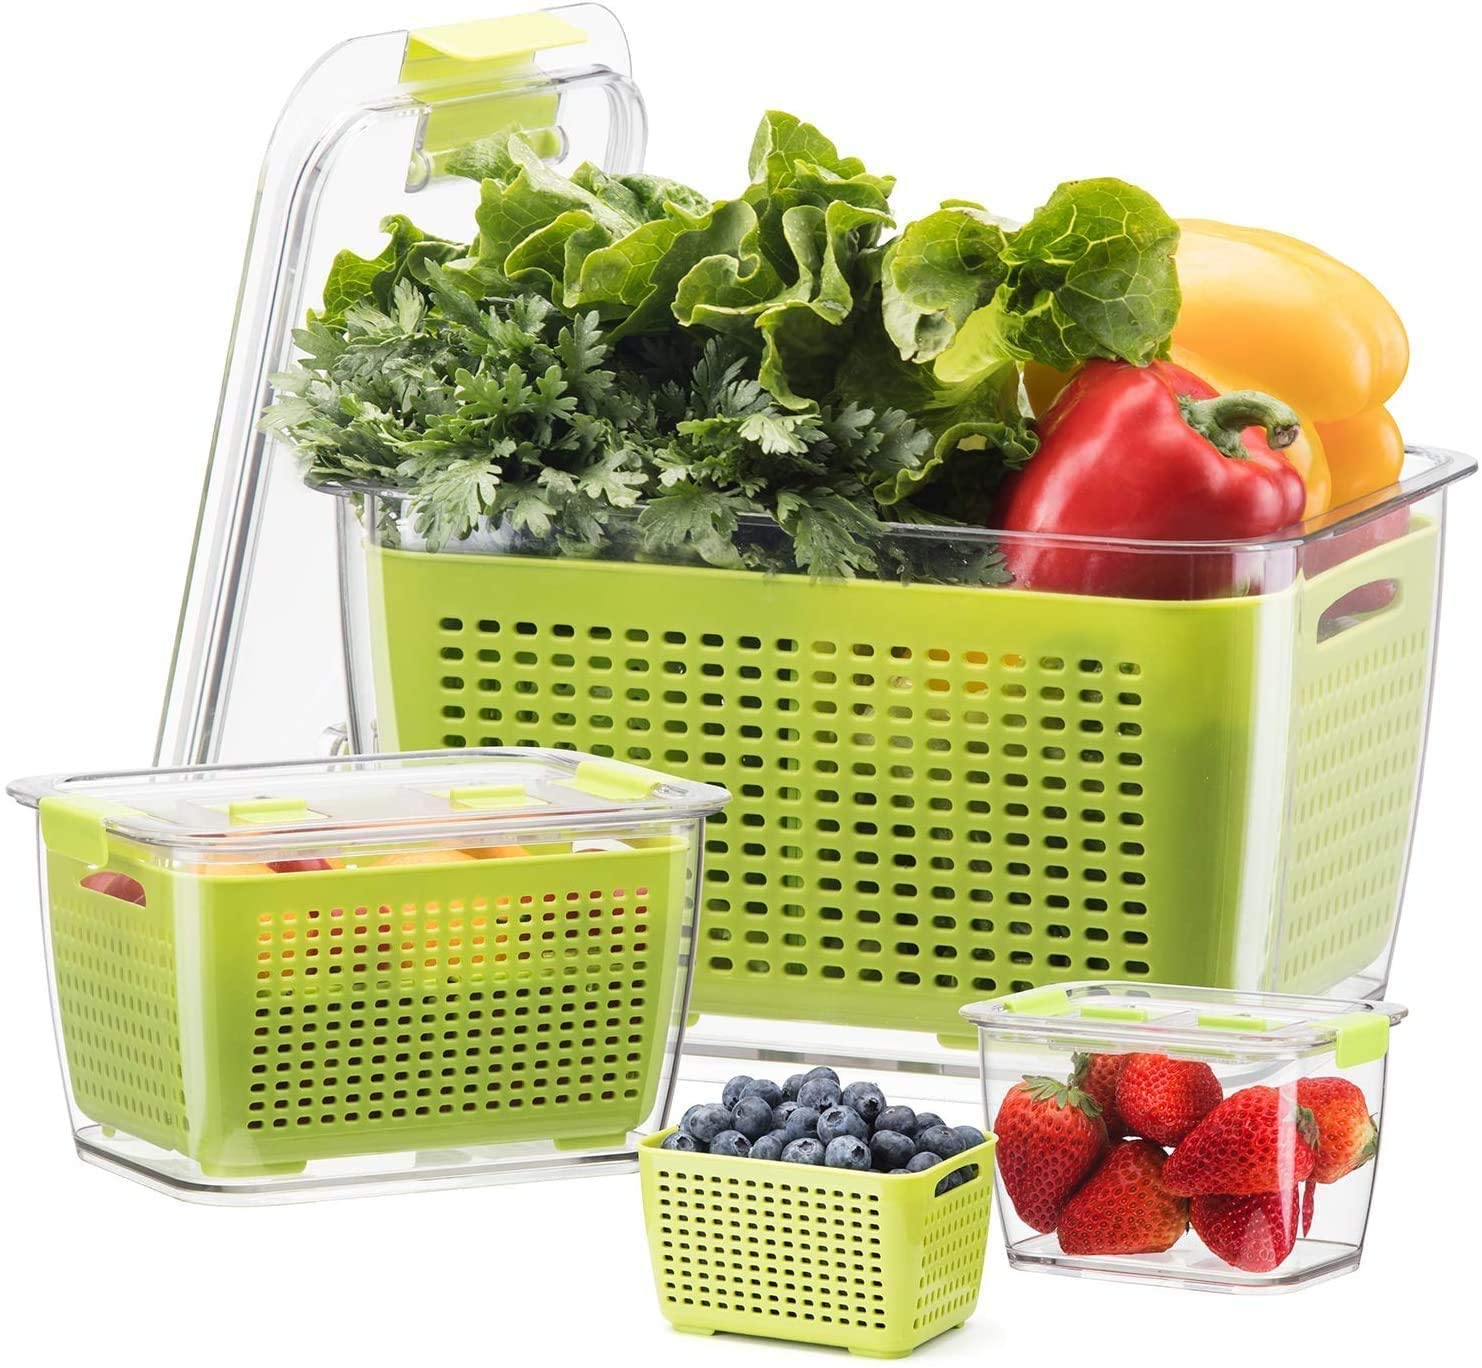 Luxear, LUXEAR Fresh Container, 3PACK Produce Saver Container BPA Free Vegetable Storage Containers Fruit and Salad Partitioned Food Storage Container with Vents Stay Fresh Containers for Refrigerator